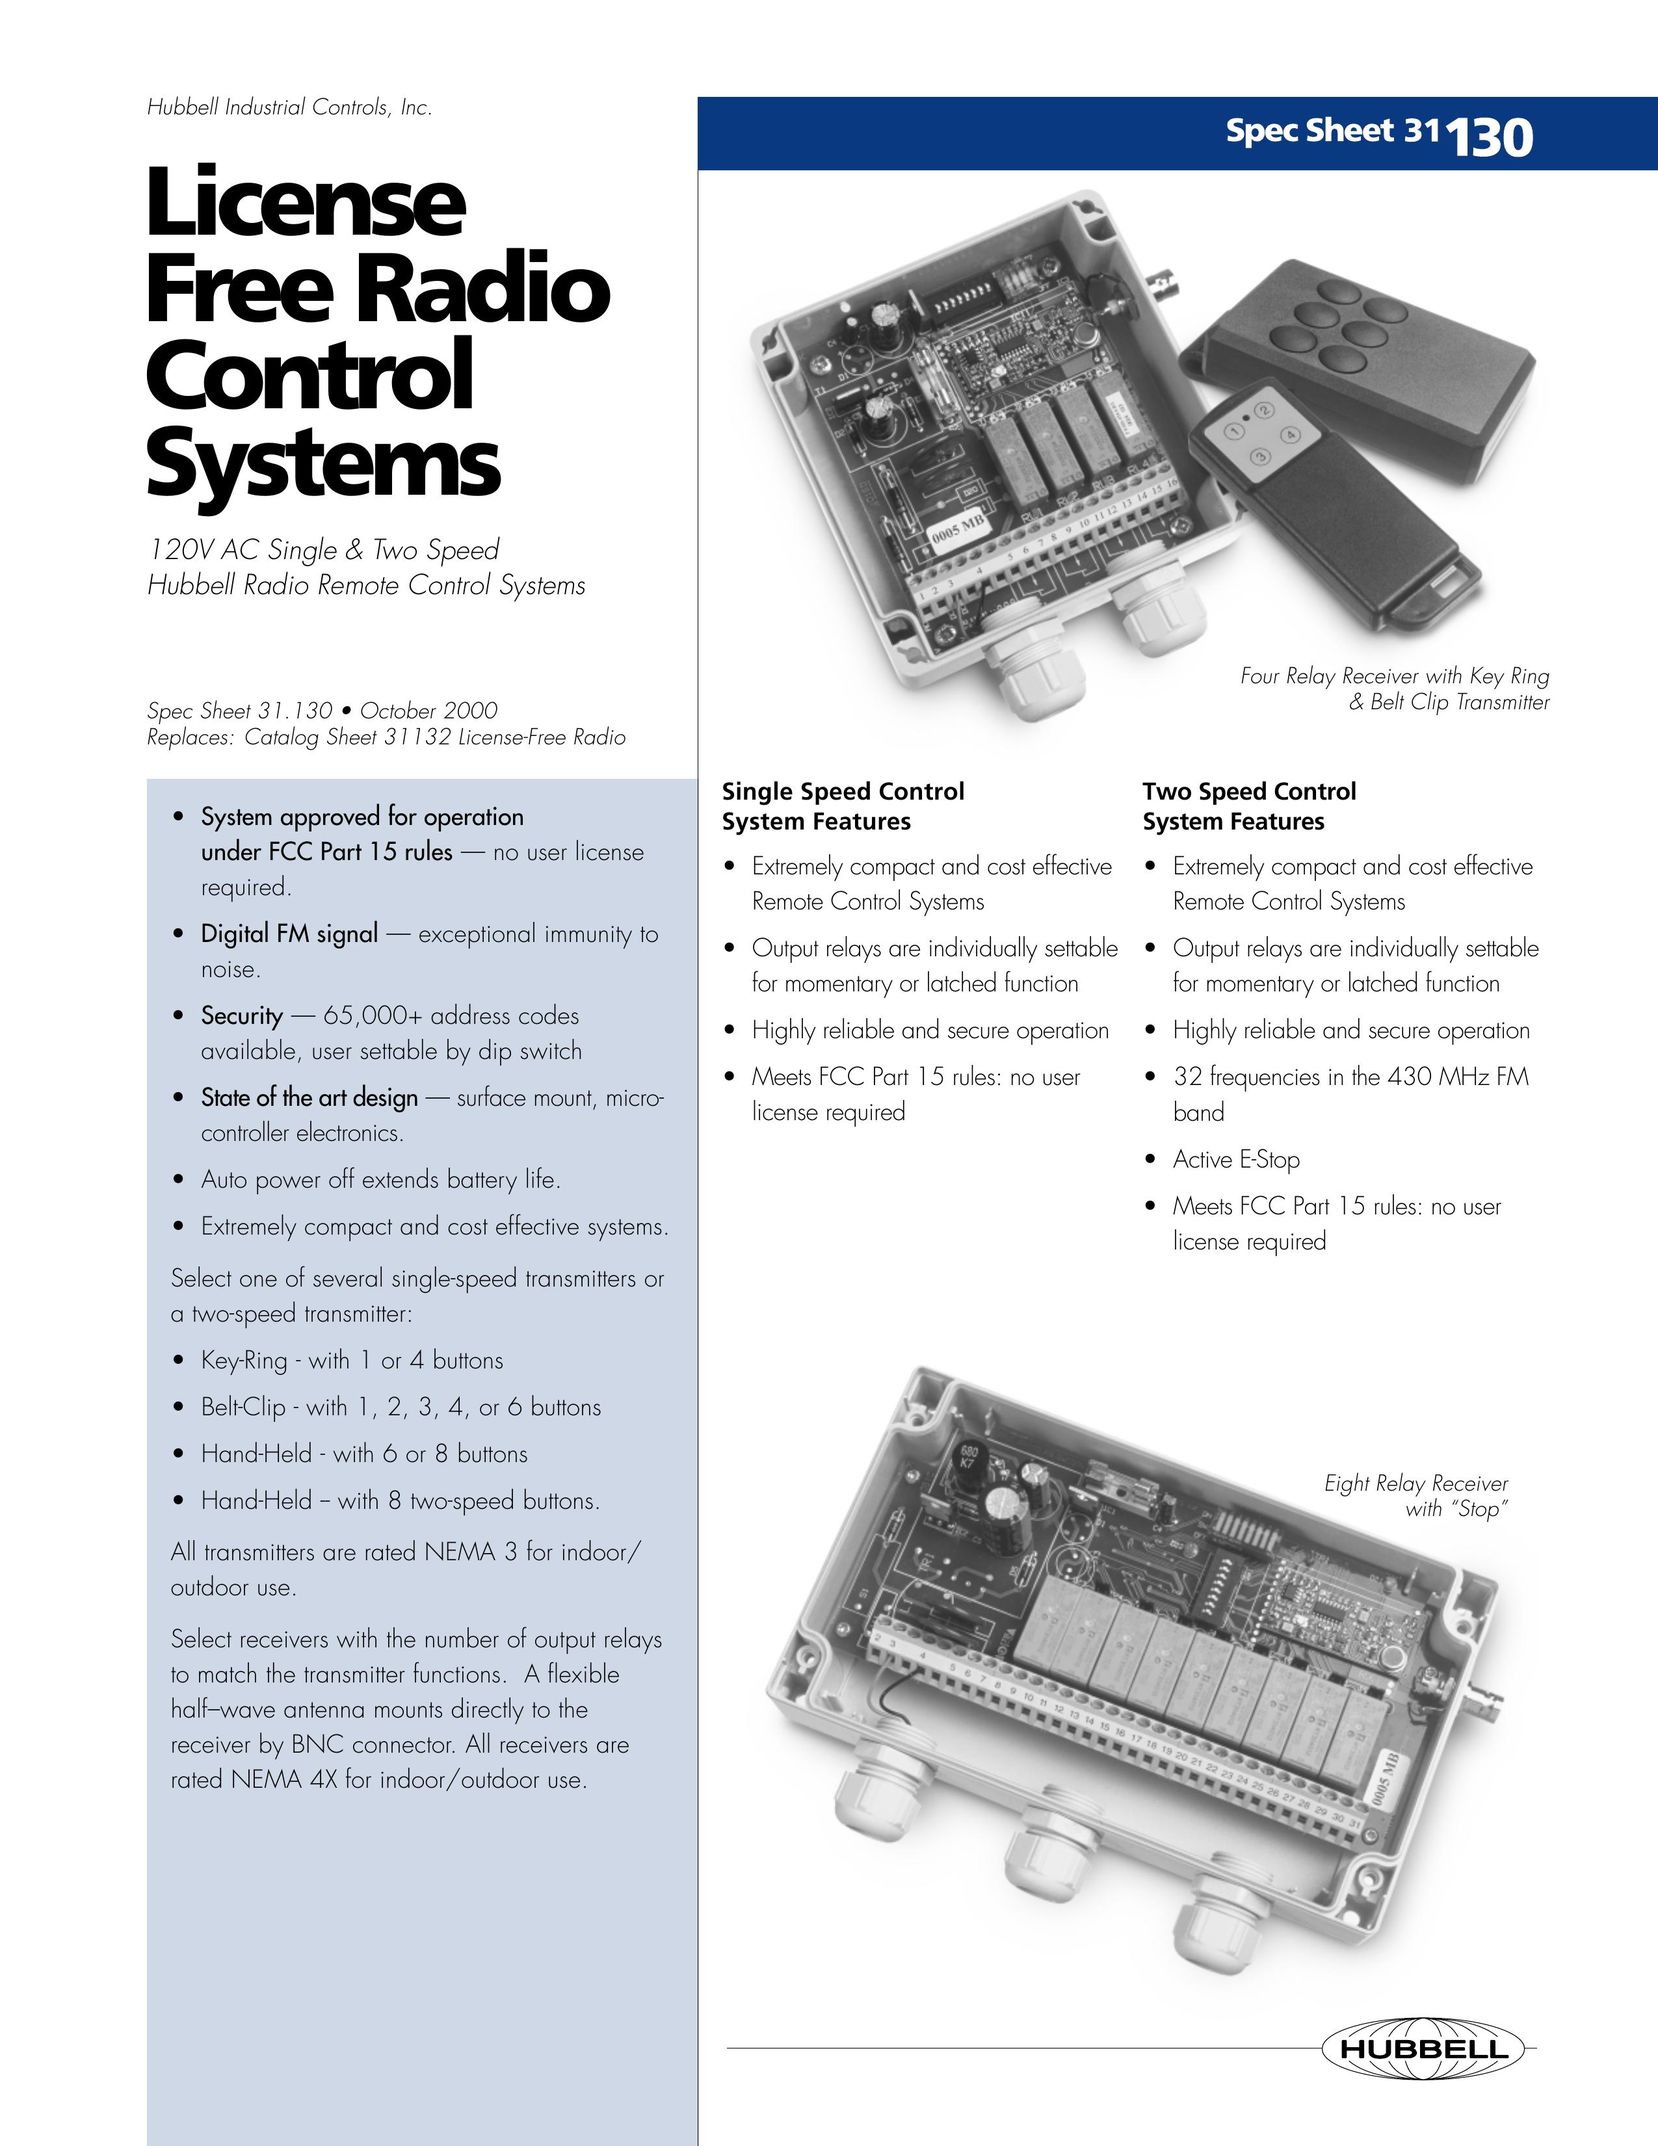 Hubbell 31.130 Stereo System User Manual